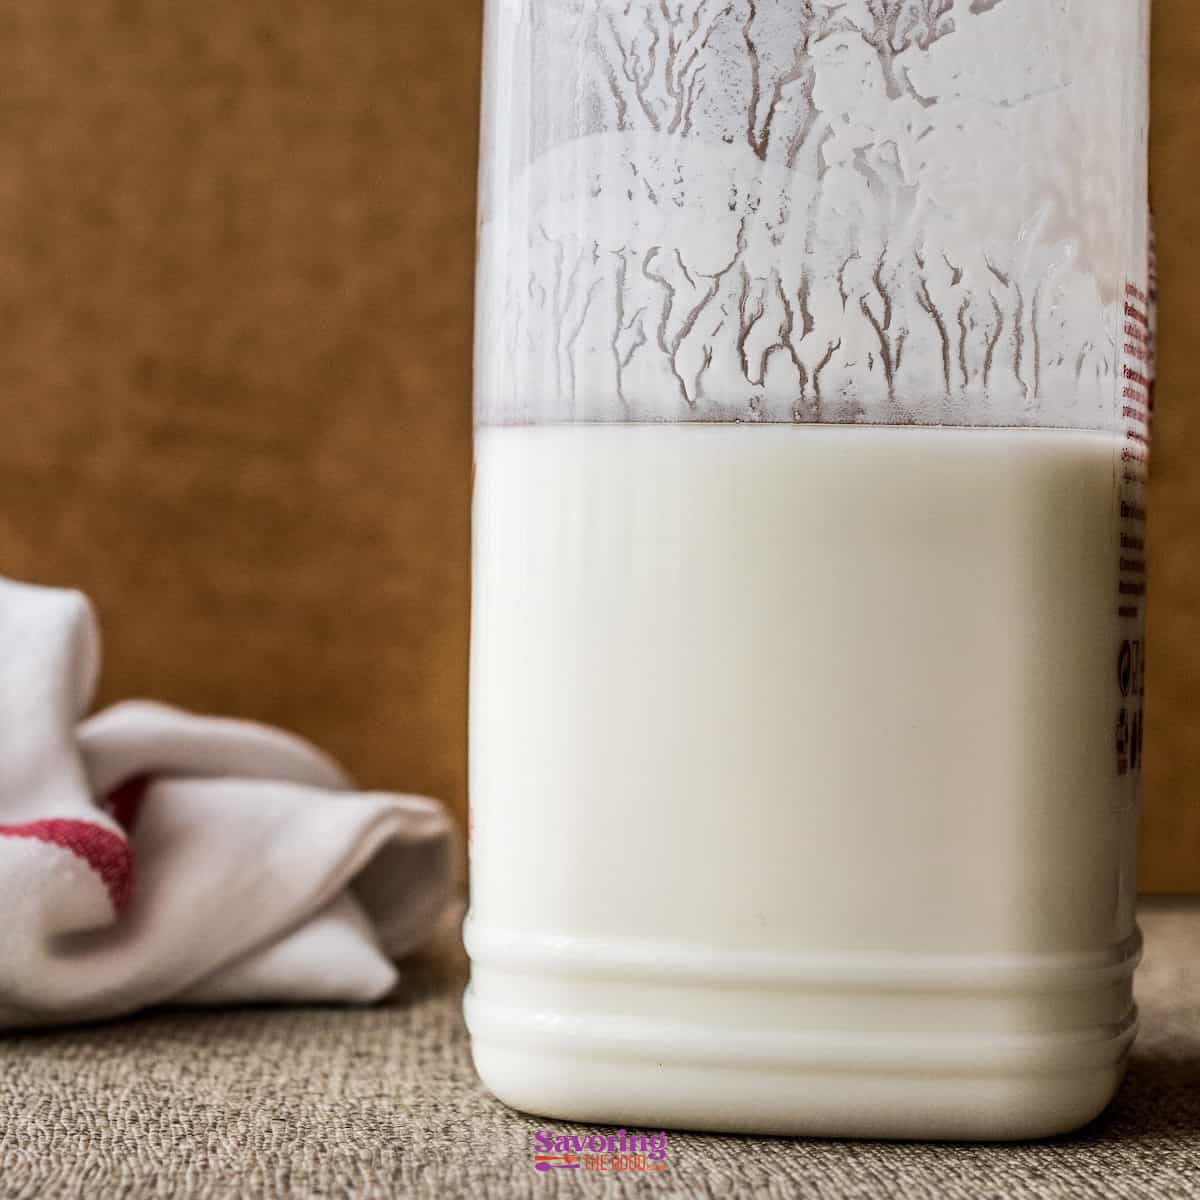 how to make buttermilk featured image of a large glass jar of buttermilk.